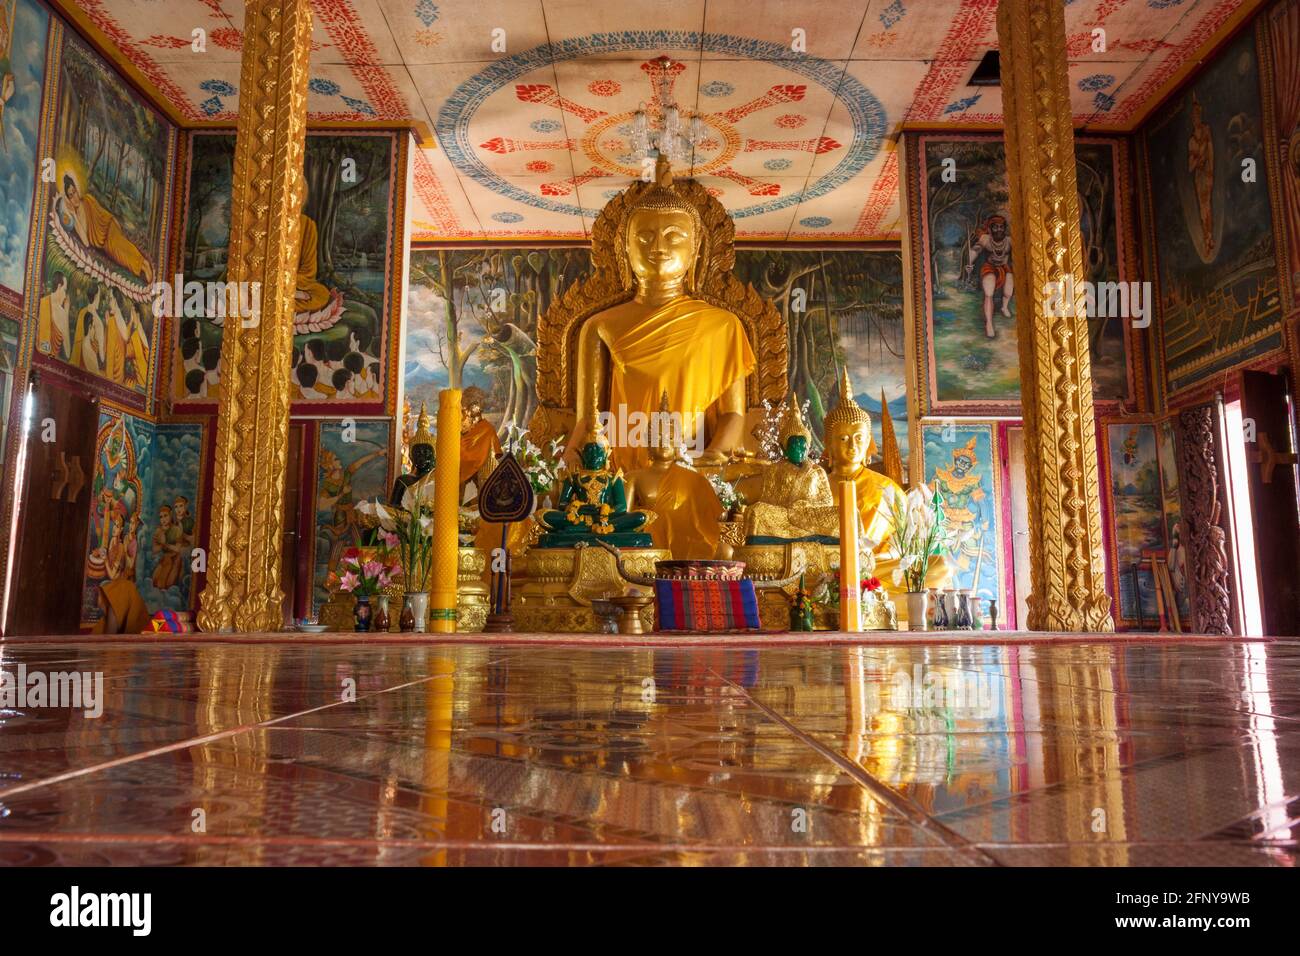 Interior or Buddhist temple in Champasak, Lao PDR Stock Photo